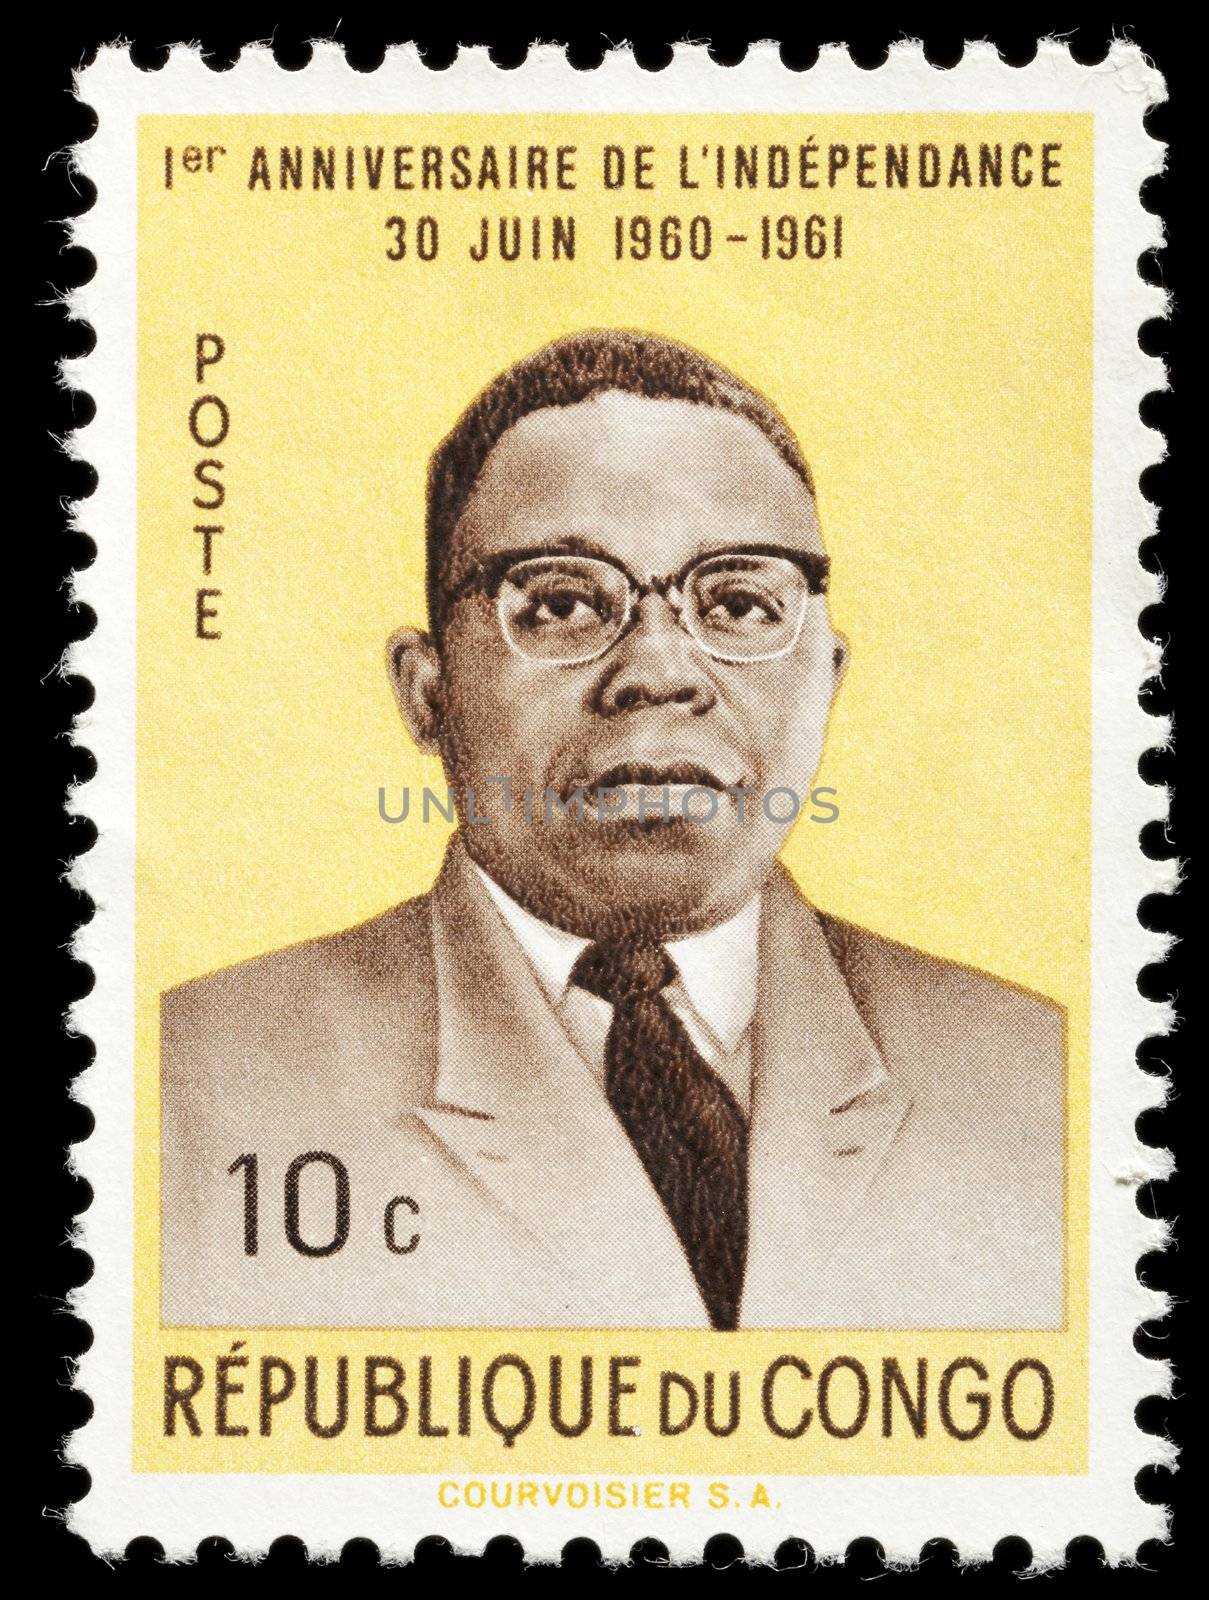 Congo stamp by Stocksnapper